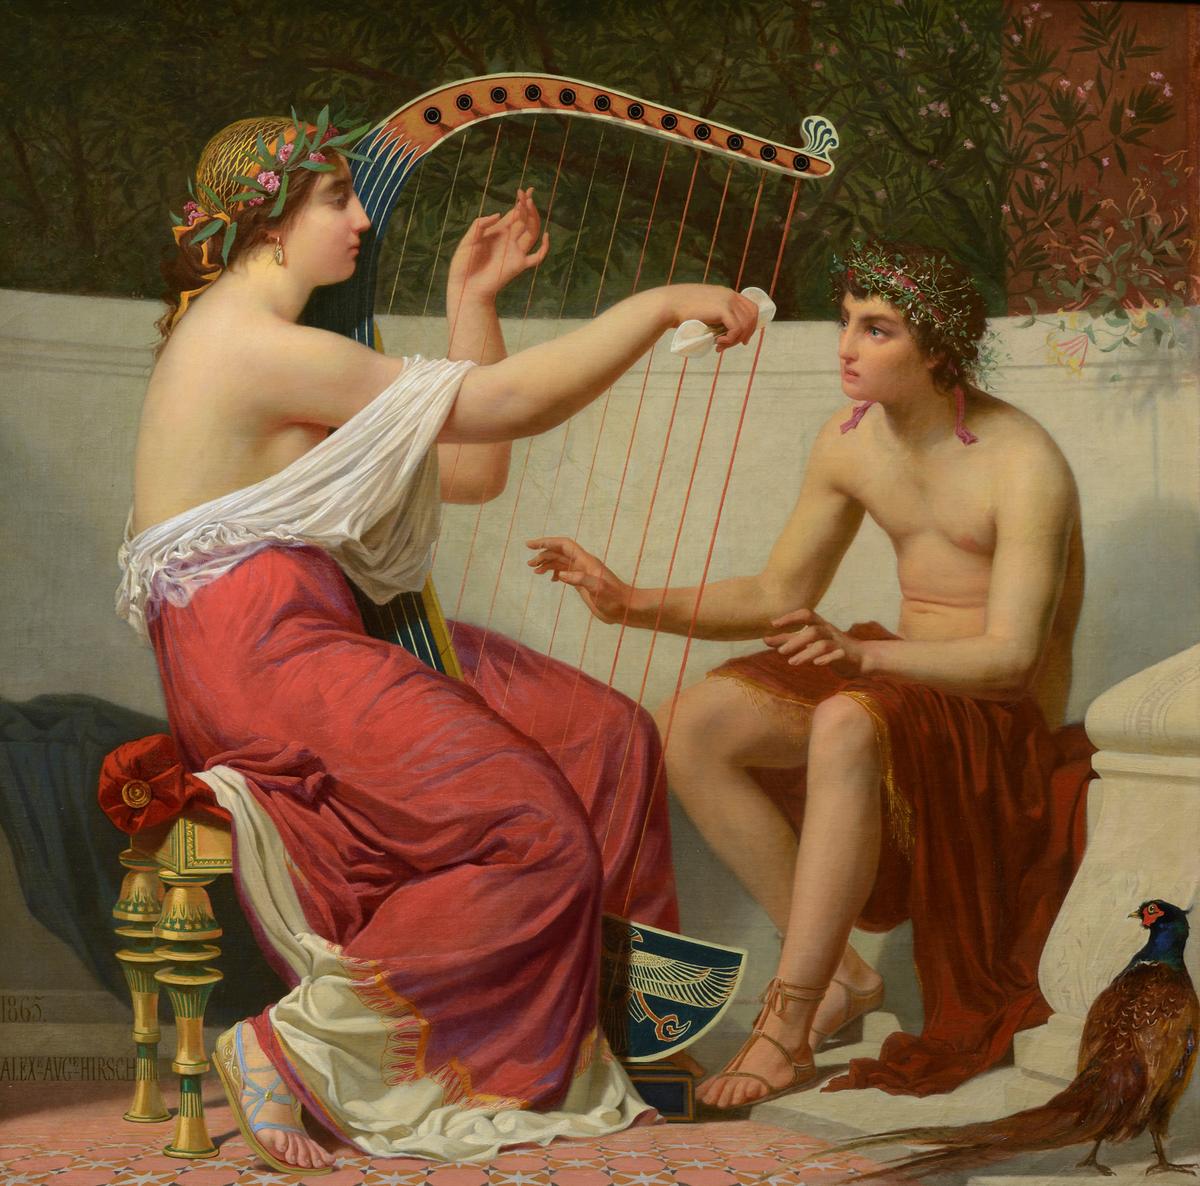 “Calliope Teaching Orpheus,” 1865, by Auguste Alexandre Hirsch. Oil on canvas; 39.3 inches by 40.9 inches. Museum of Art and Archeology of Périgord, in Périgueux, France. (Public Domain)